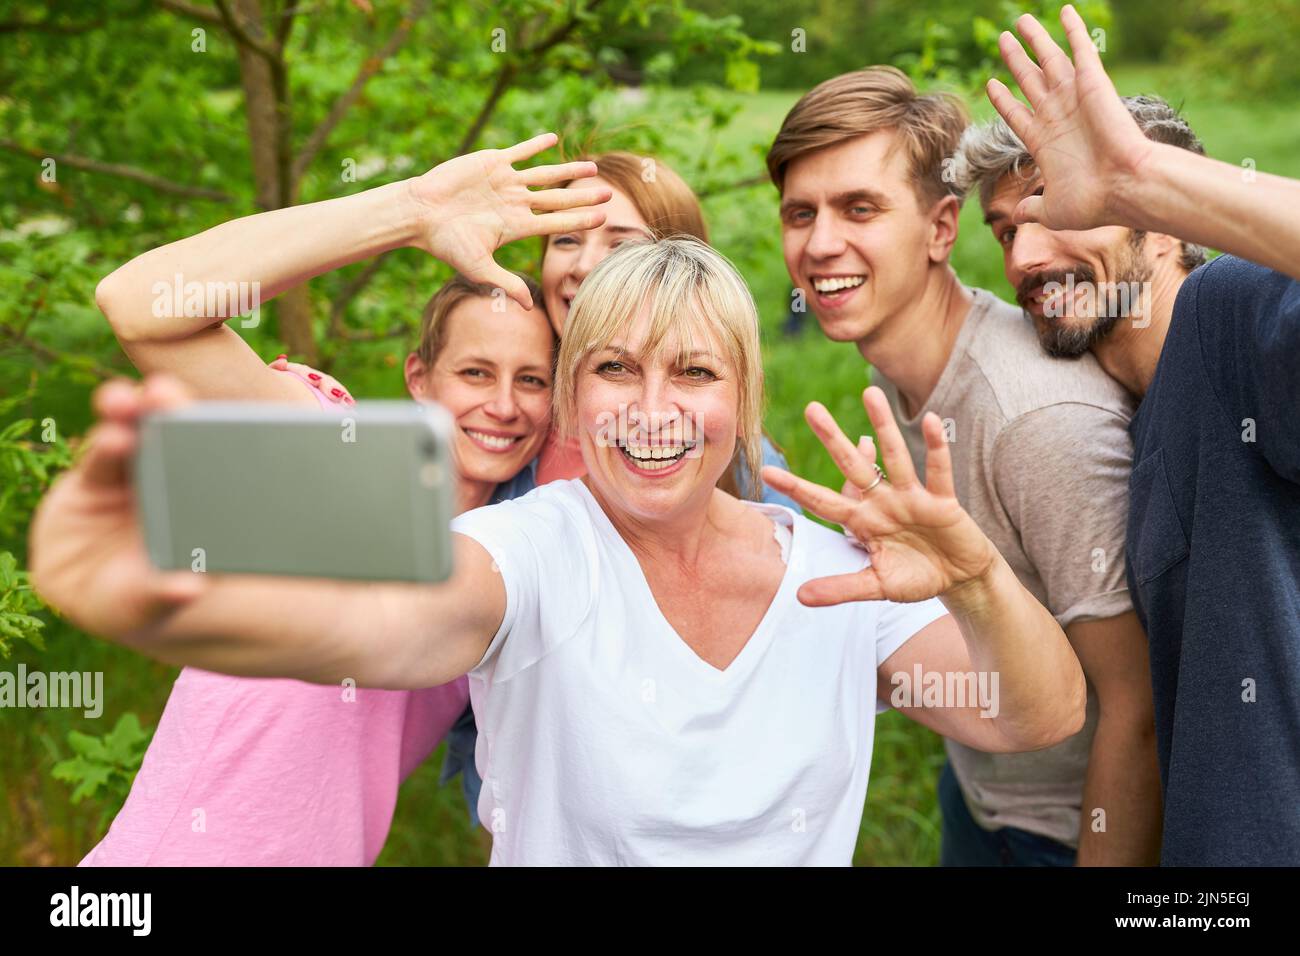 Group of friends or family have fun taking selfie with smartphone on vacation Stock Photo